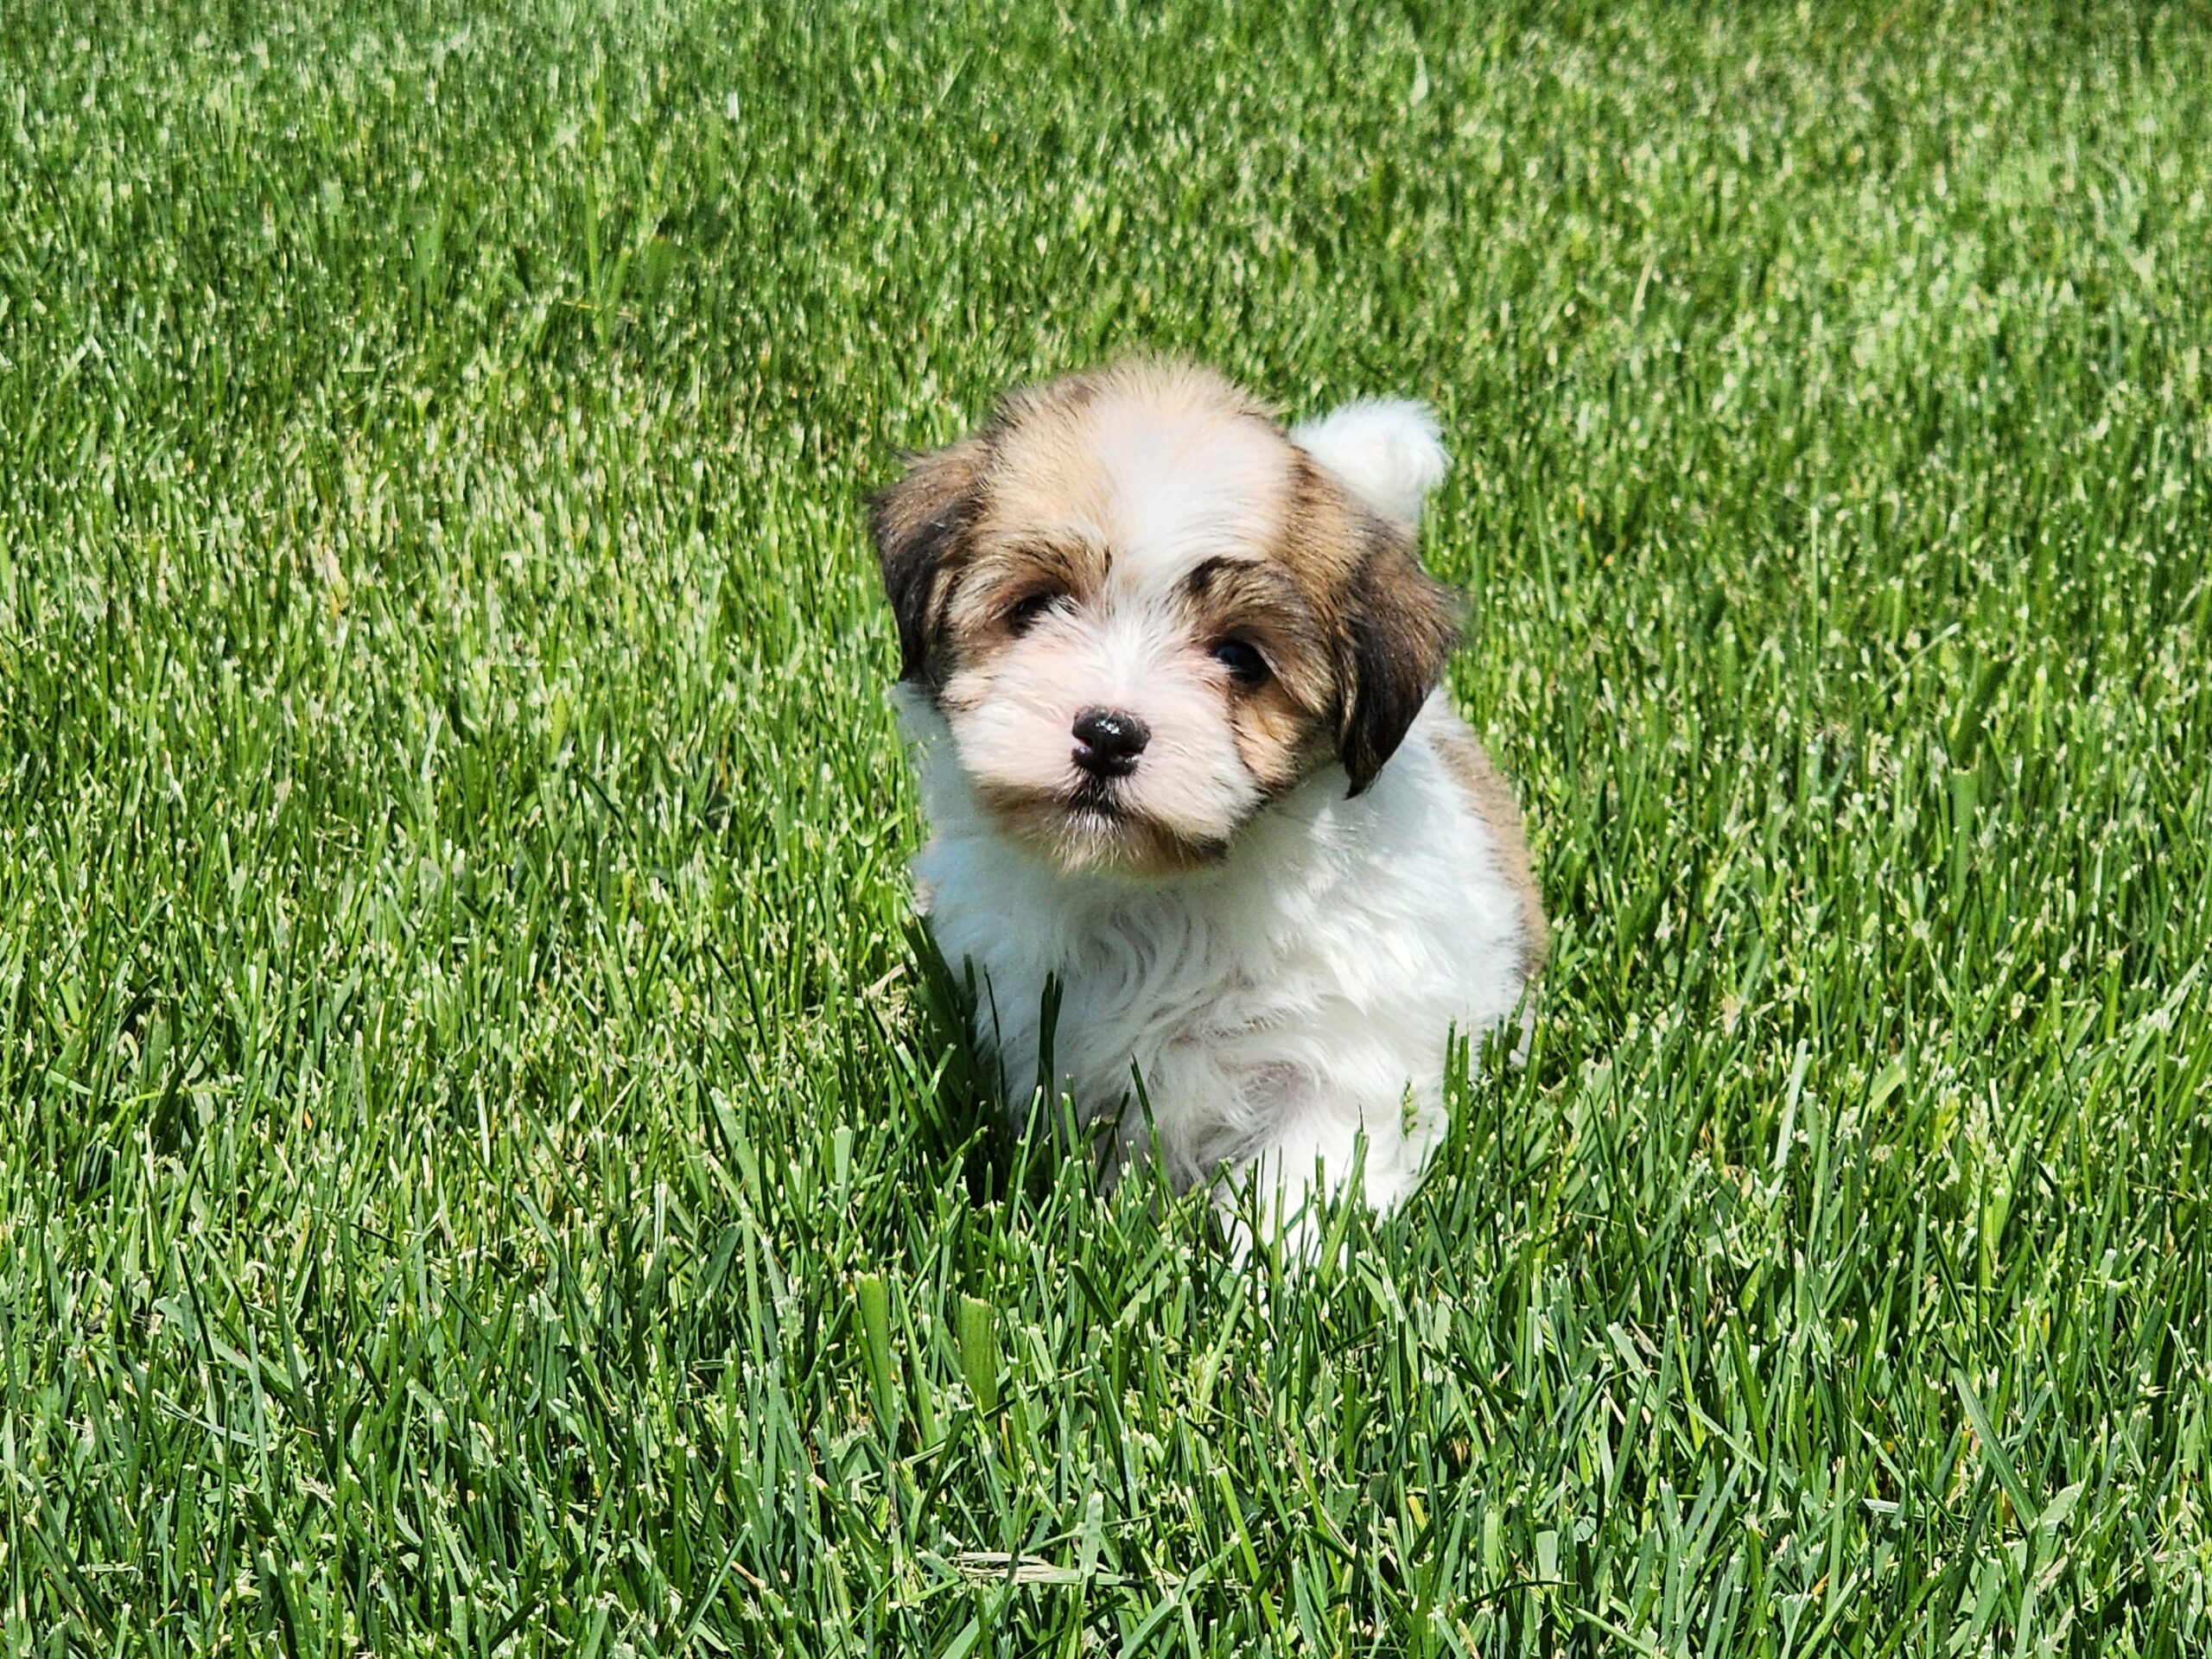 "London" DOB: 3/25/23.  Breed: Havanese. Sex: Female.  Available June 1.  Price: $1800  ON HOLD